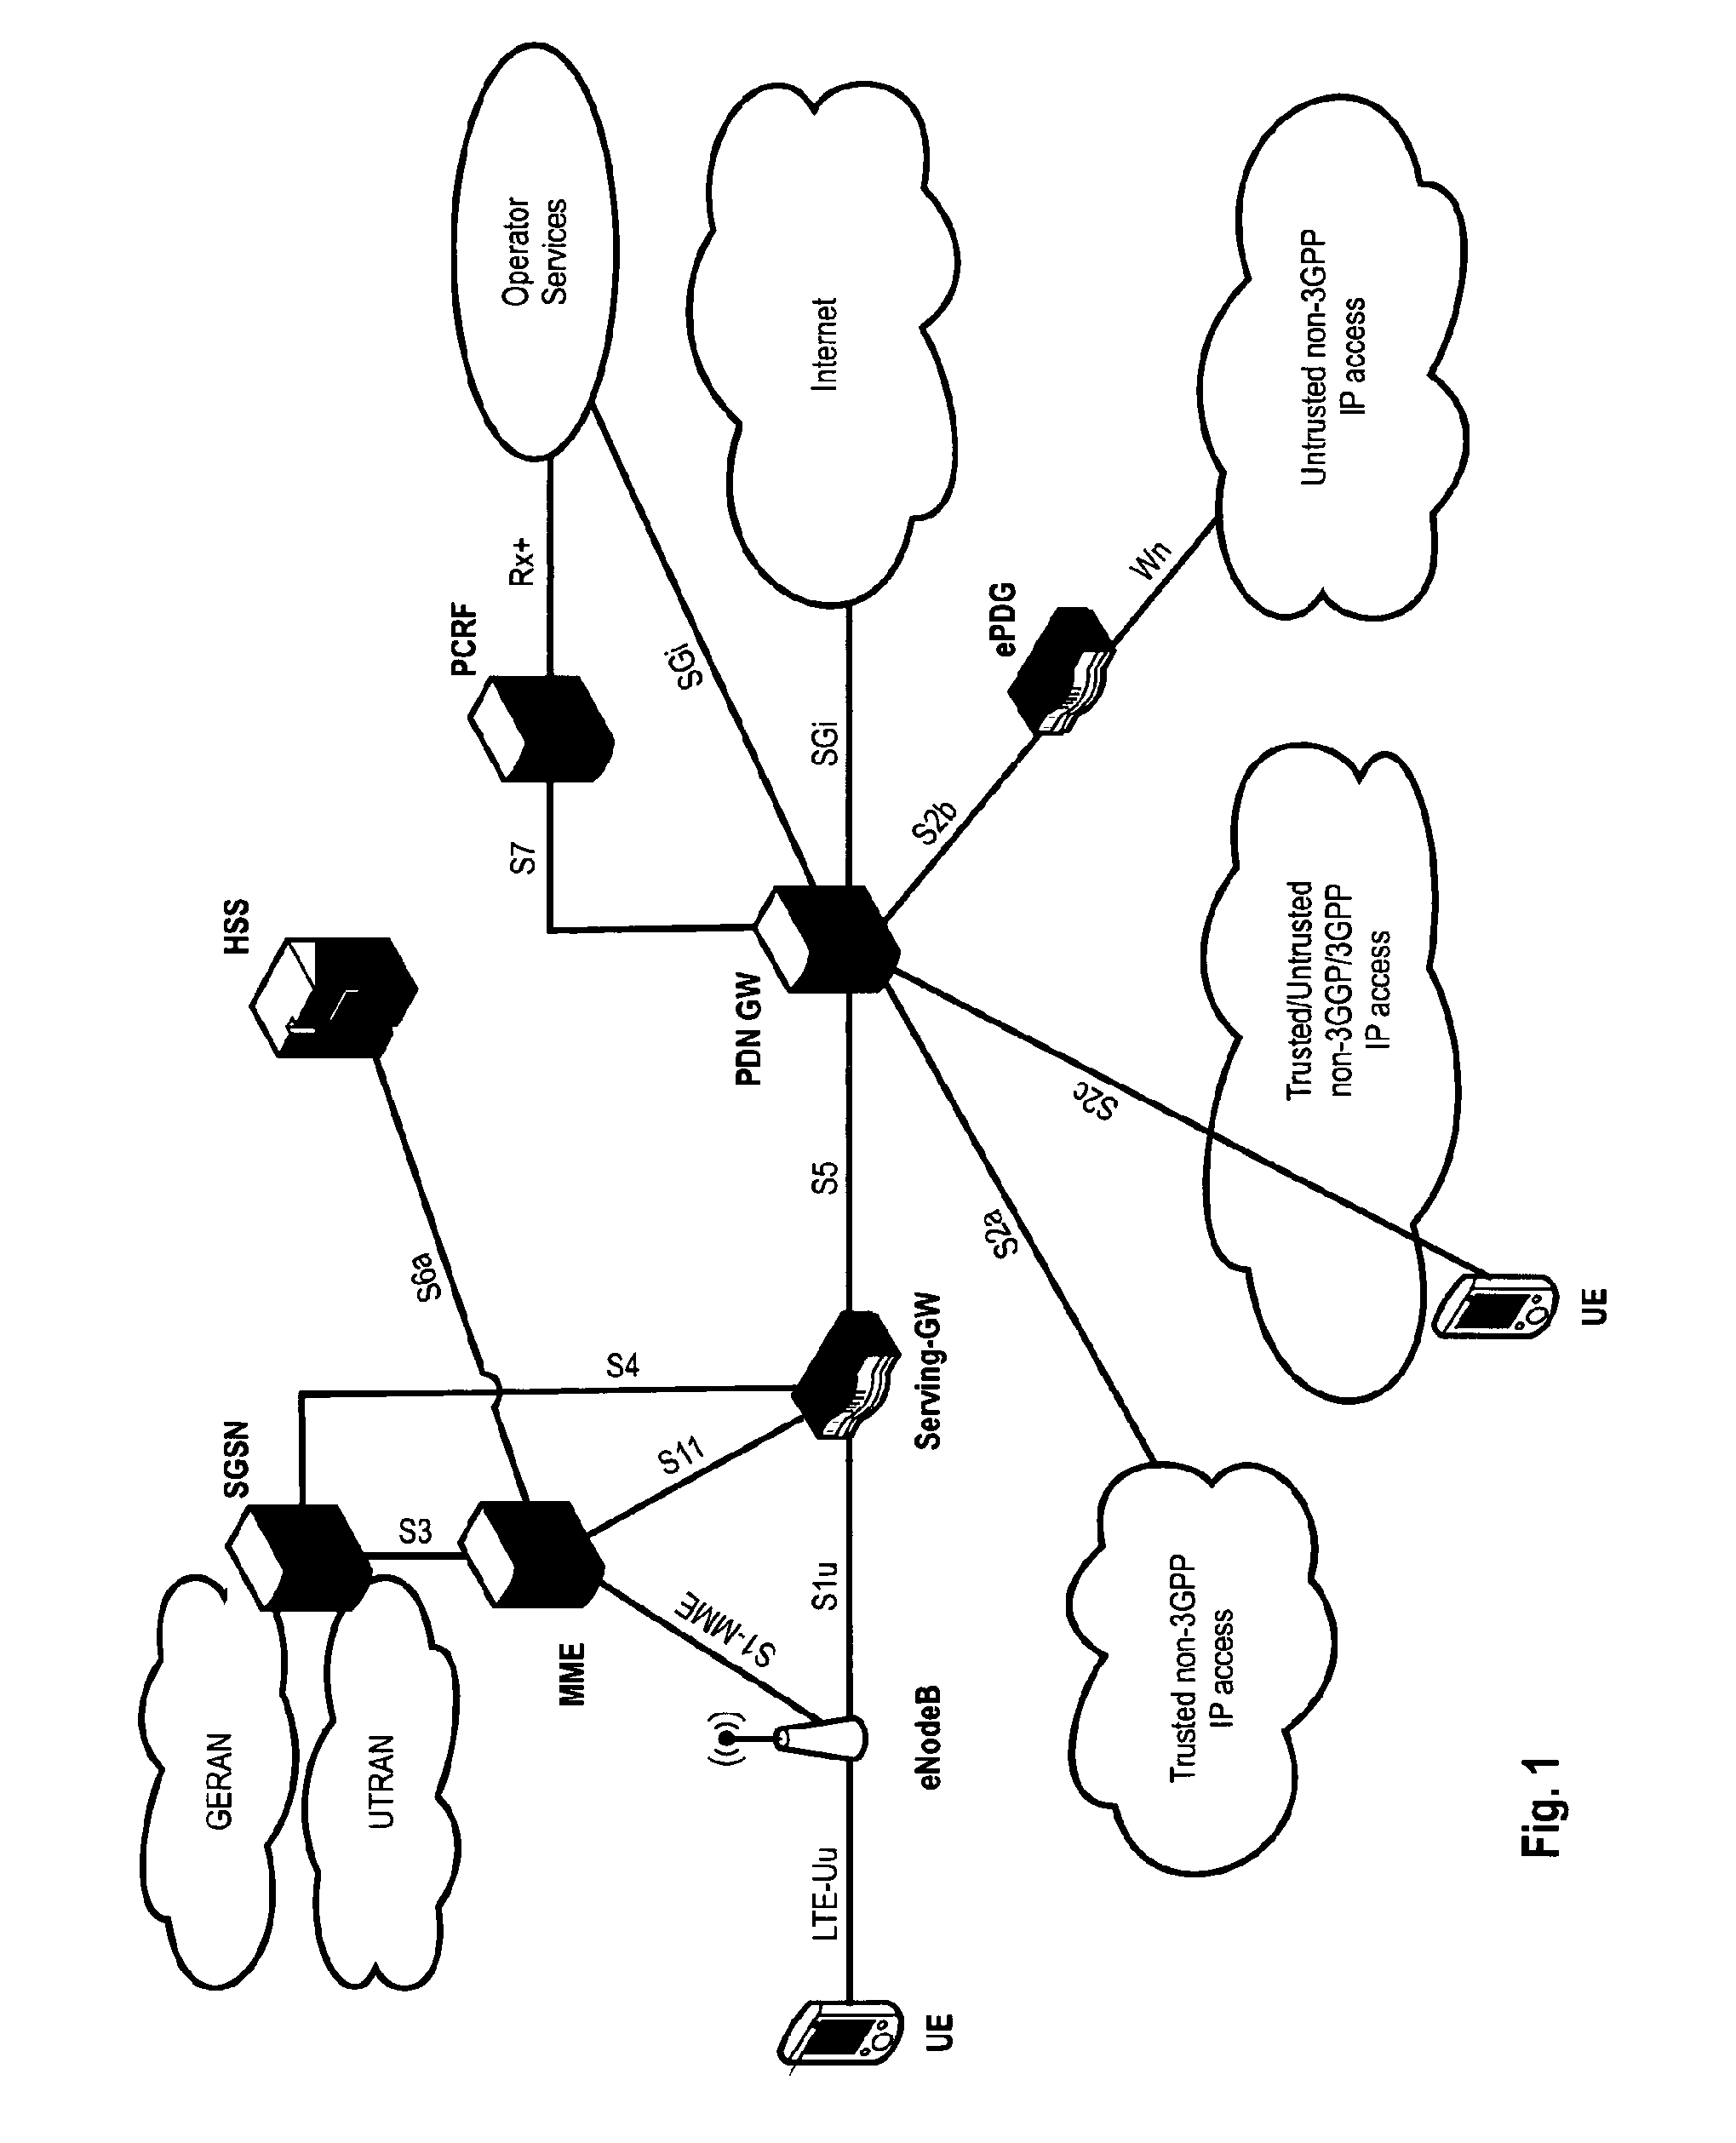 Timing advance configuration for multiple uplink component carriers